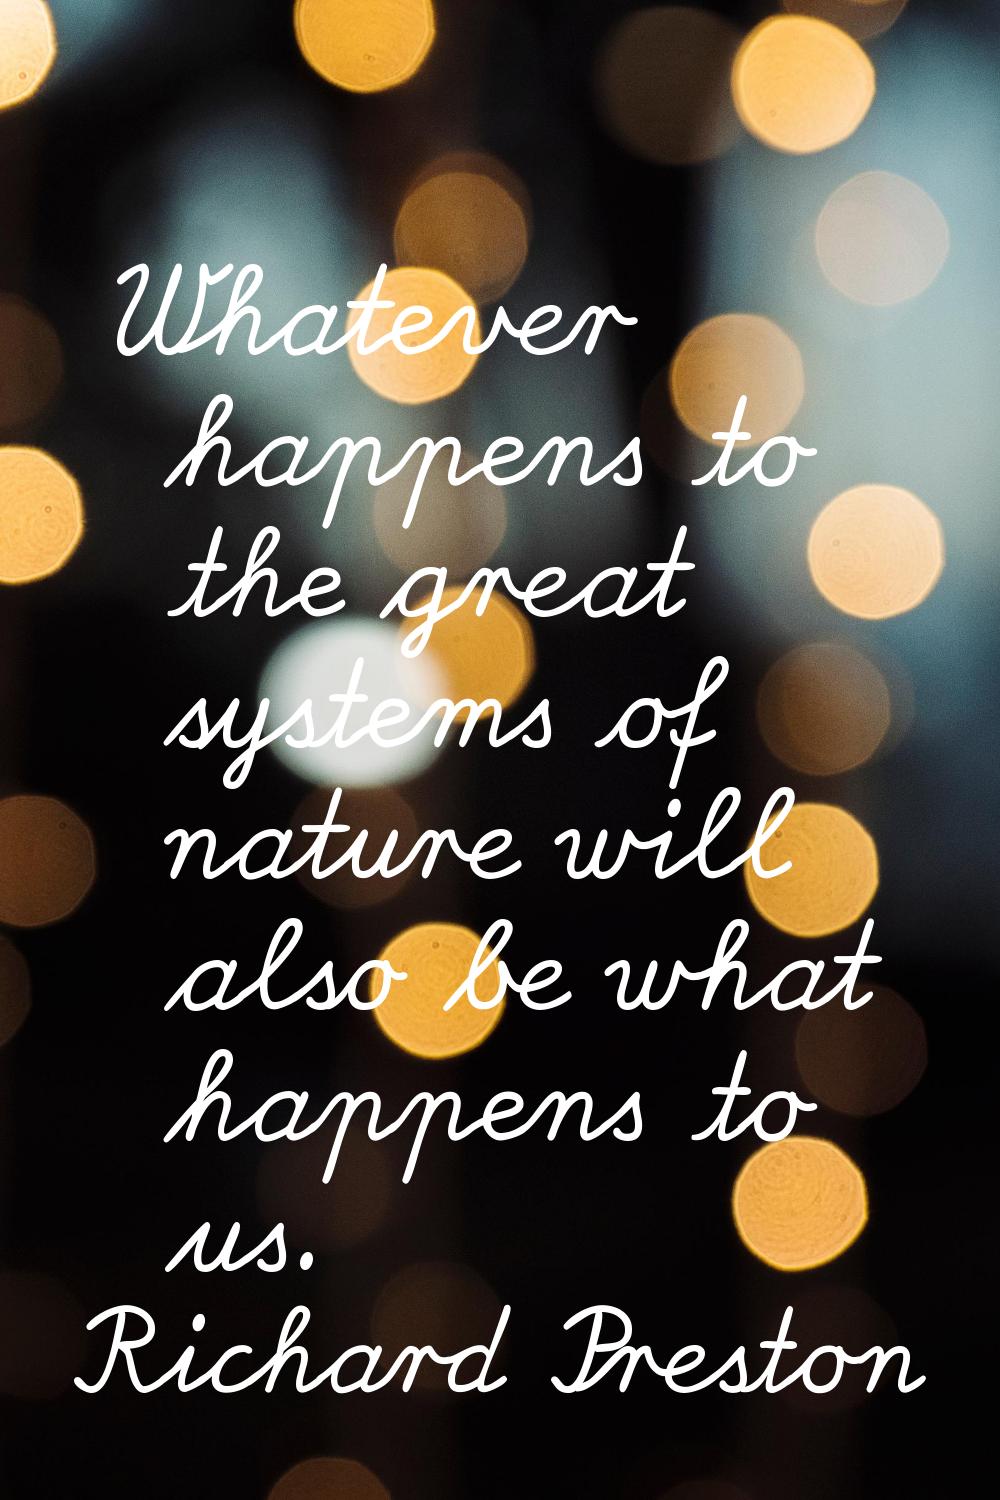 Whatever happens to the great systems of nature will also be what happens to us.